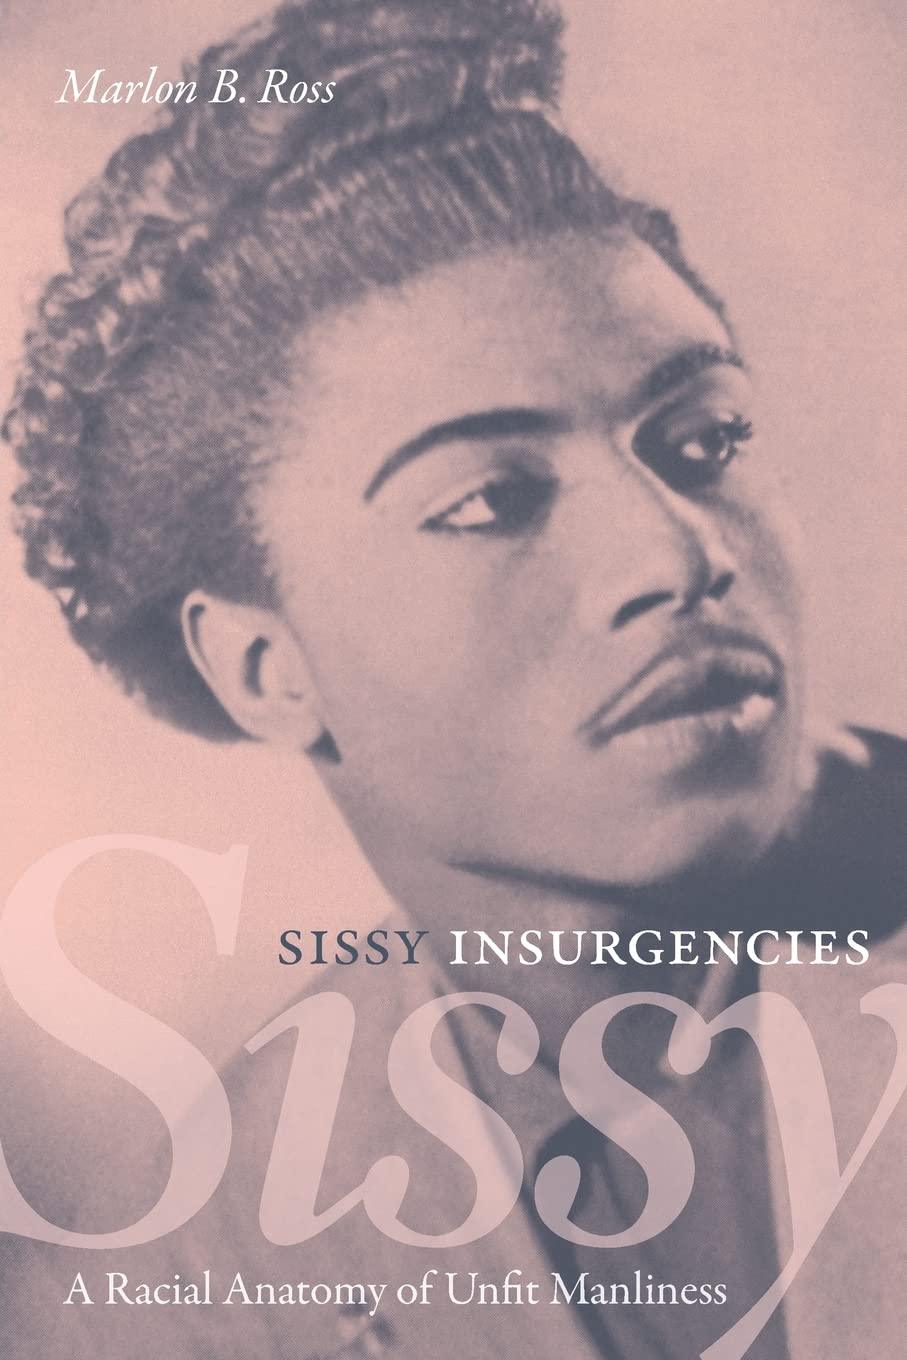 Sissy Insurgencies: A Racial Anatomy of Unfit Manliness - ShopQueer.co